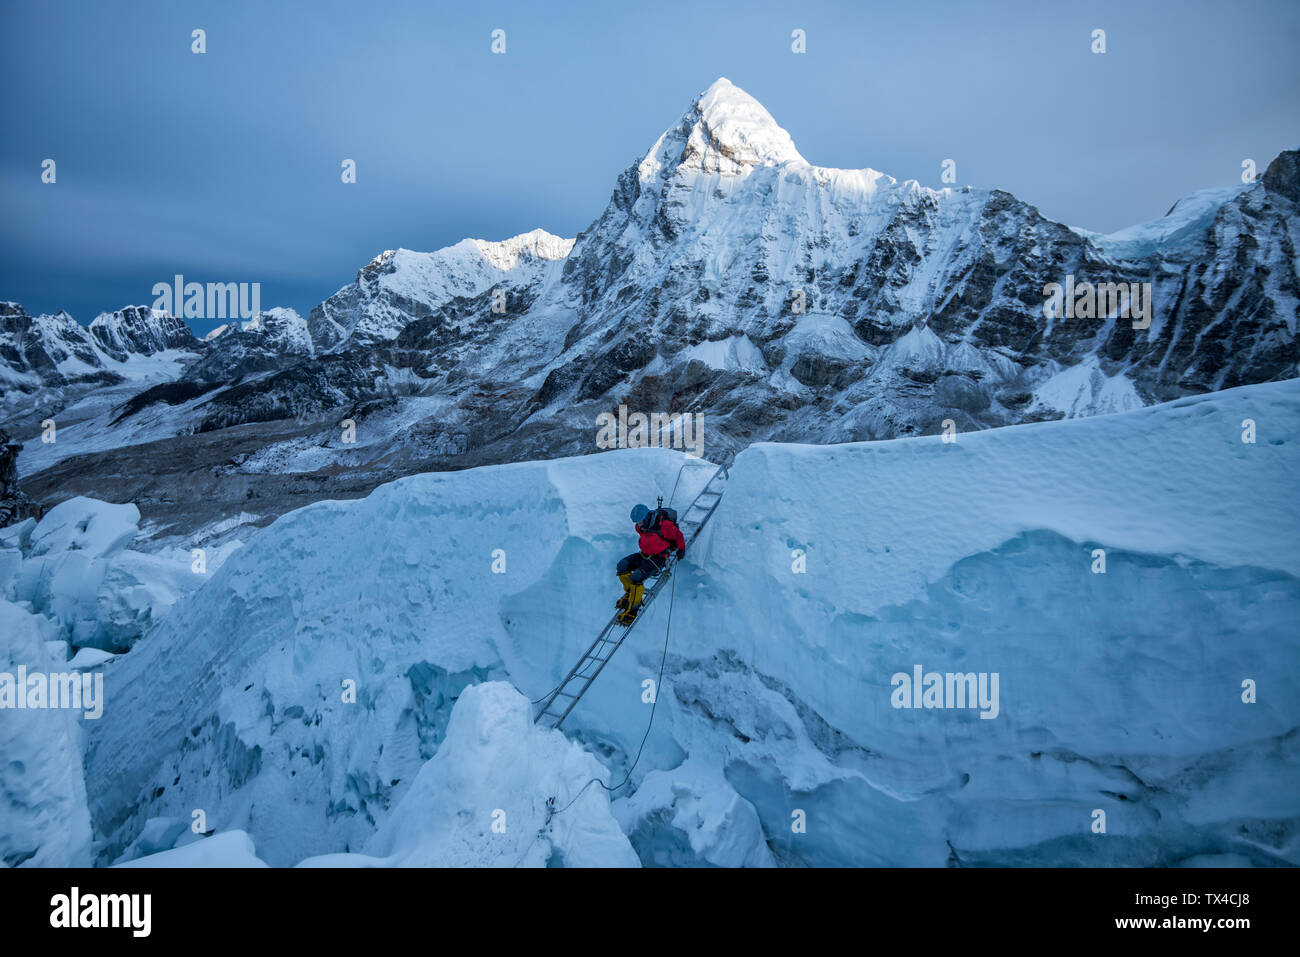 Nepal, Solo Khumbu, Mountaineer at Everest Icefall, Pumori in background Stock Photo